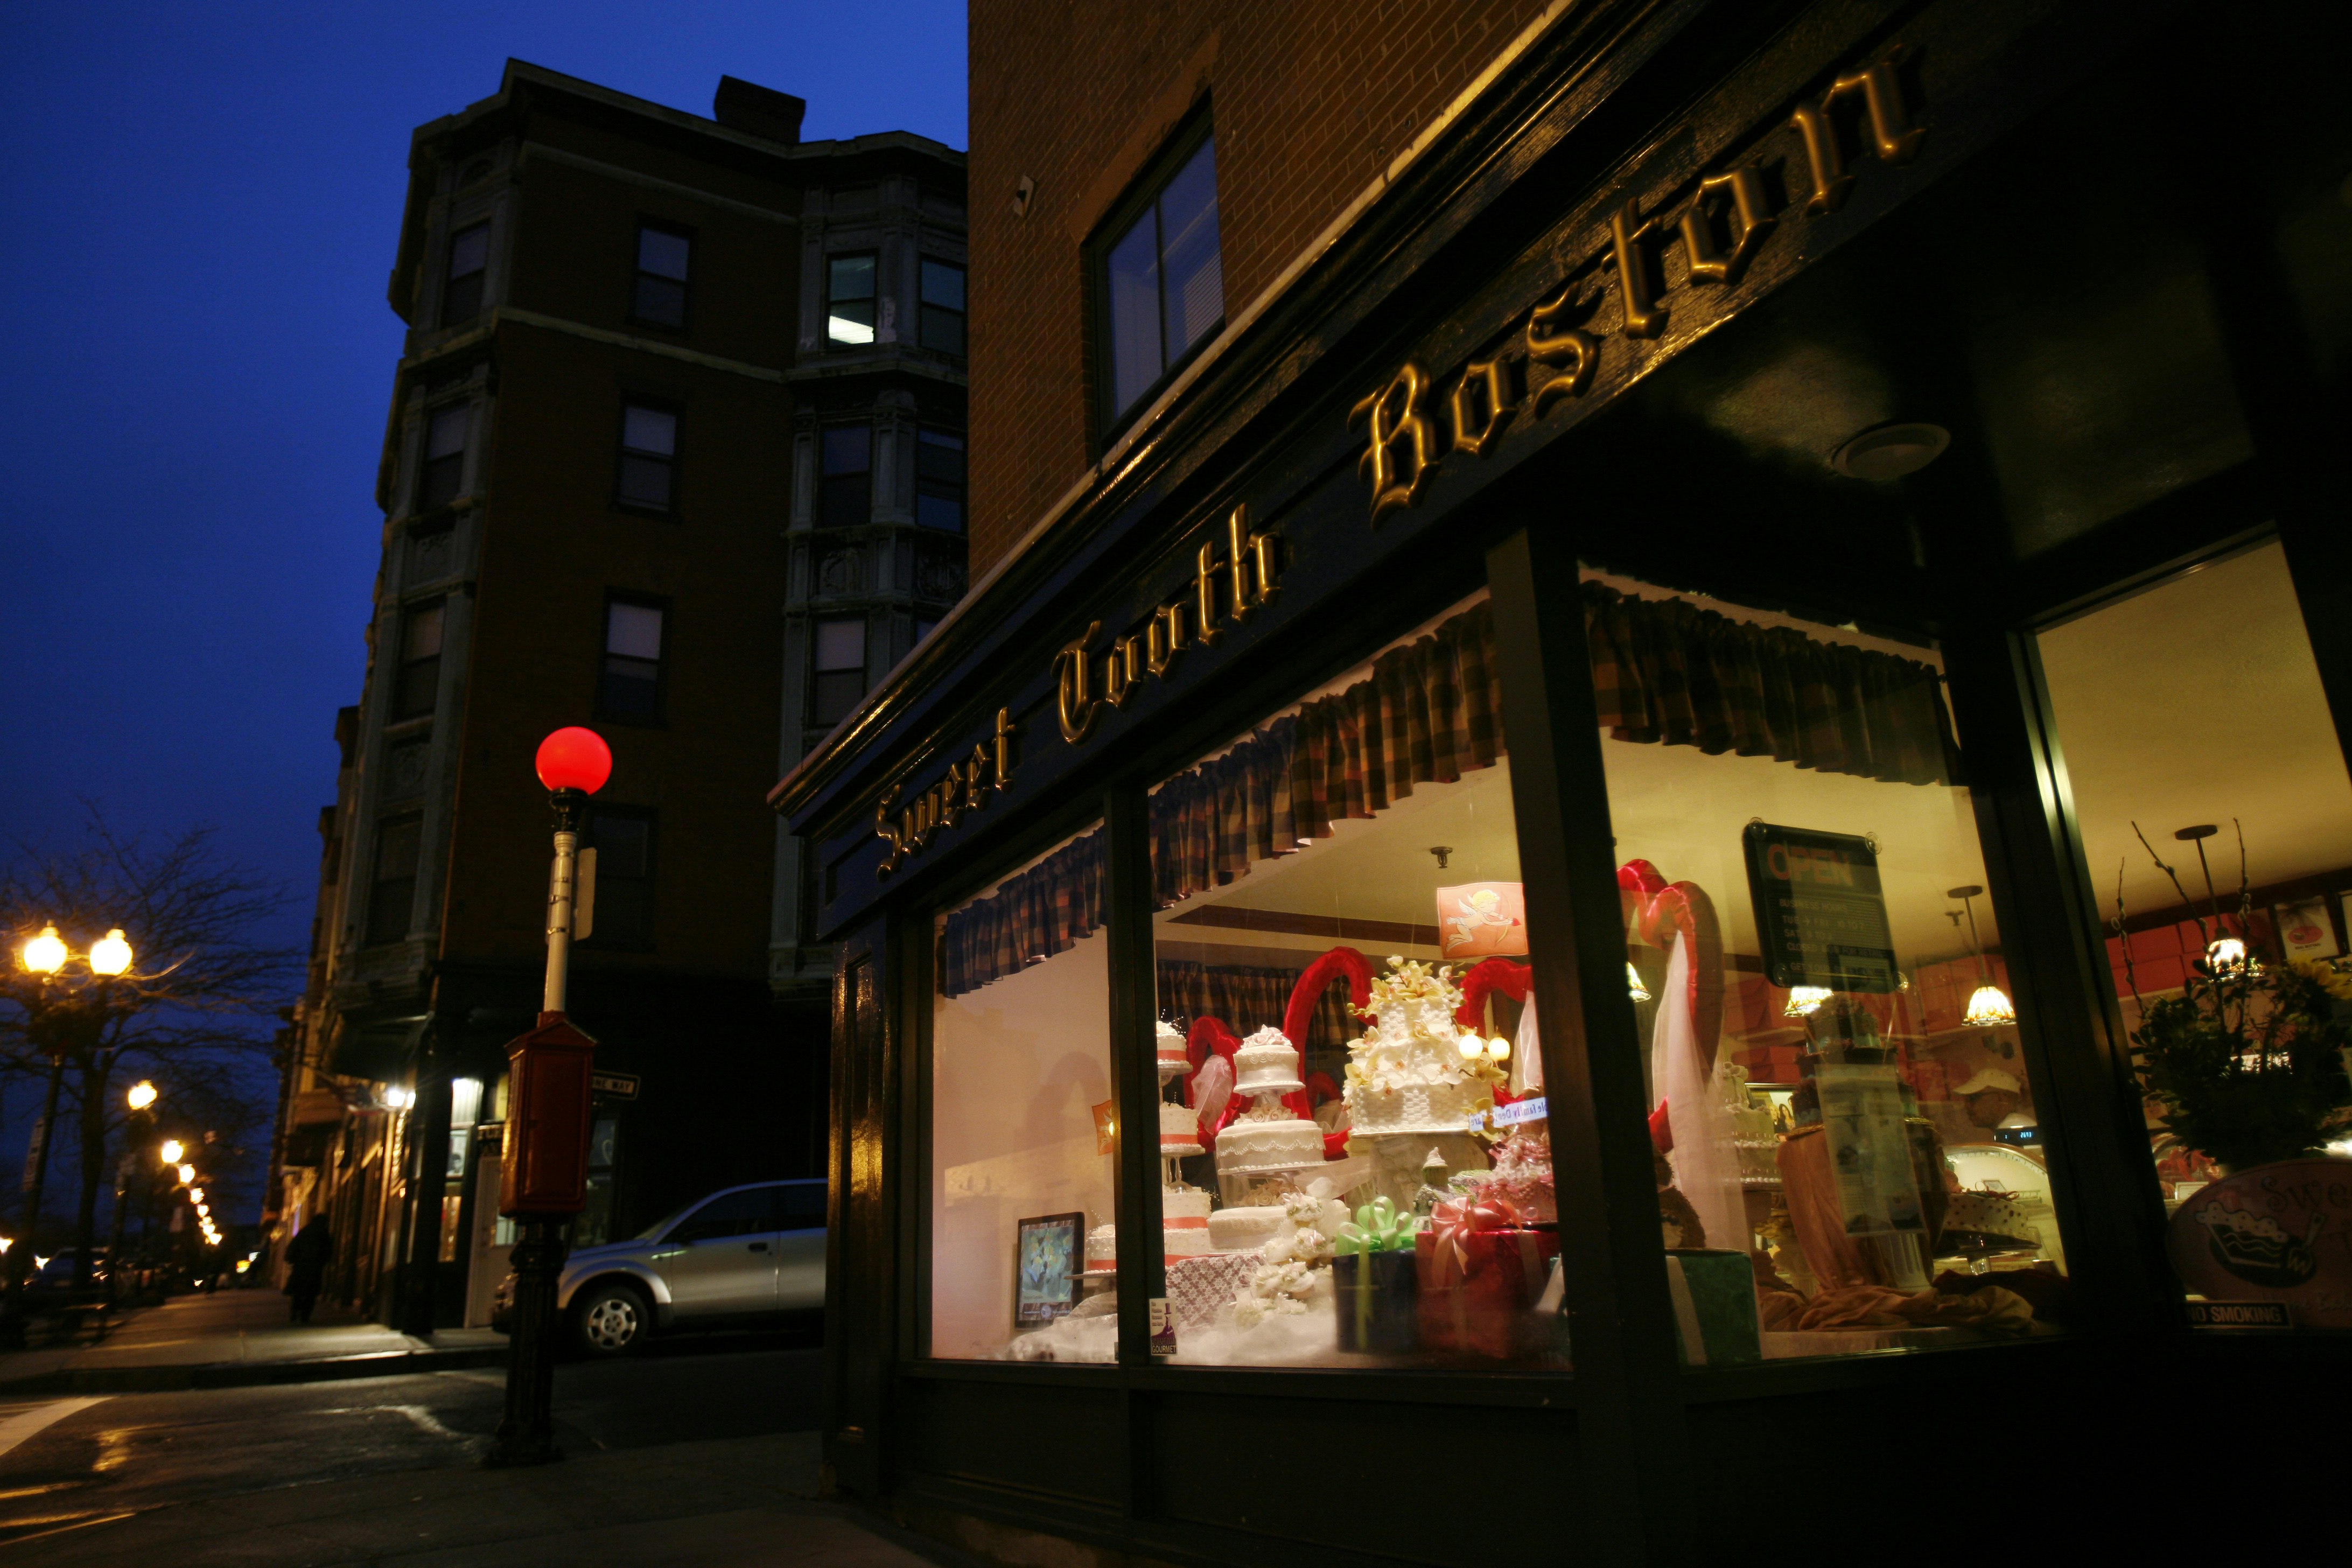 Exterior view of Sweet Tooth Boston at night. The golden letterings "Sweet Tooth Boston" catch the street lights. You can see large cakes and other decorations in the display window.